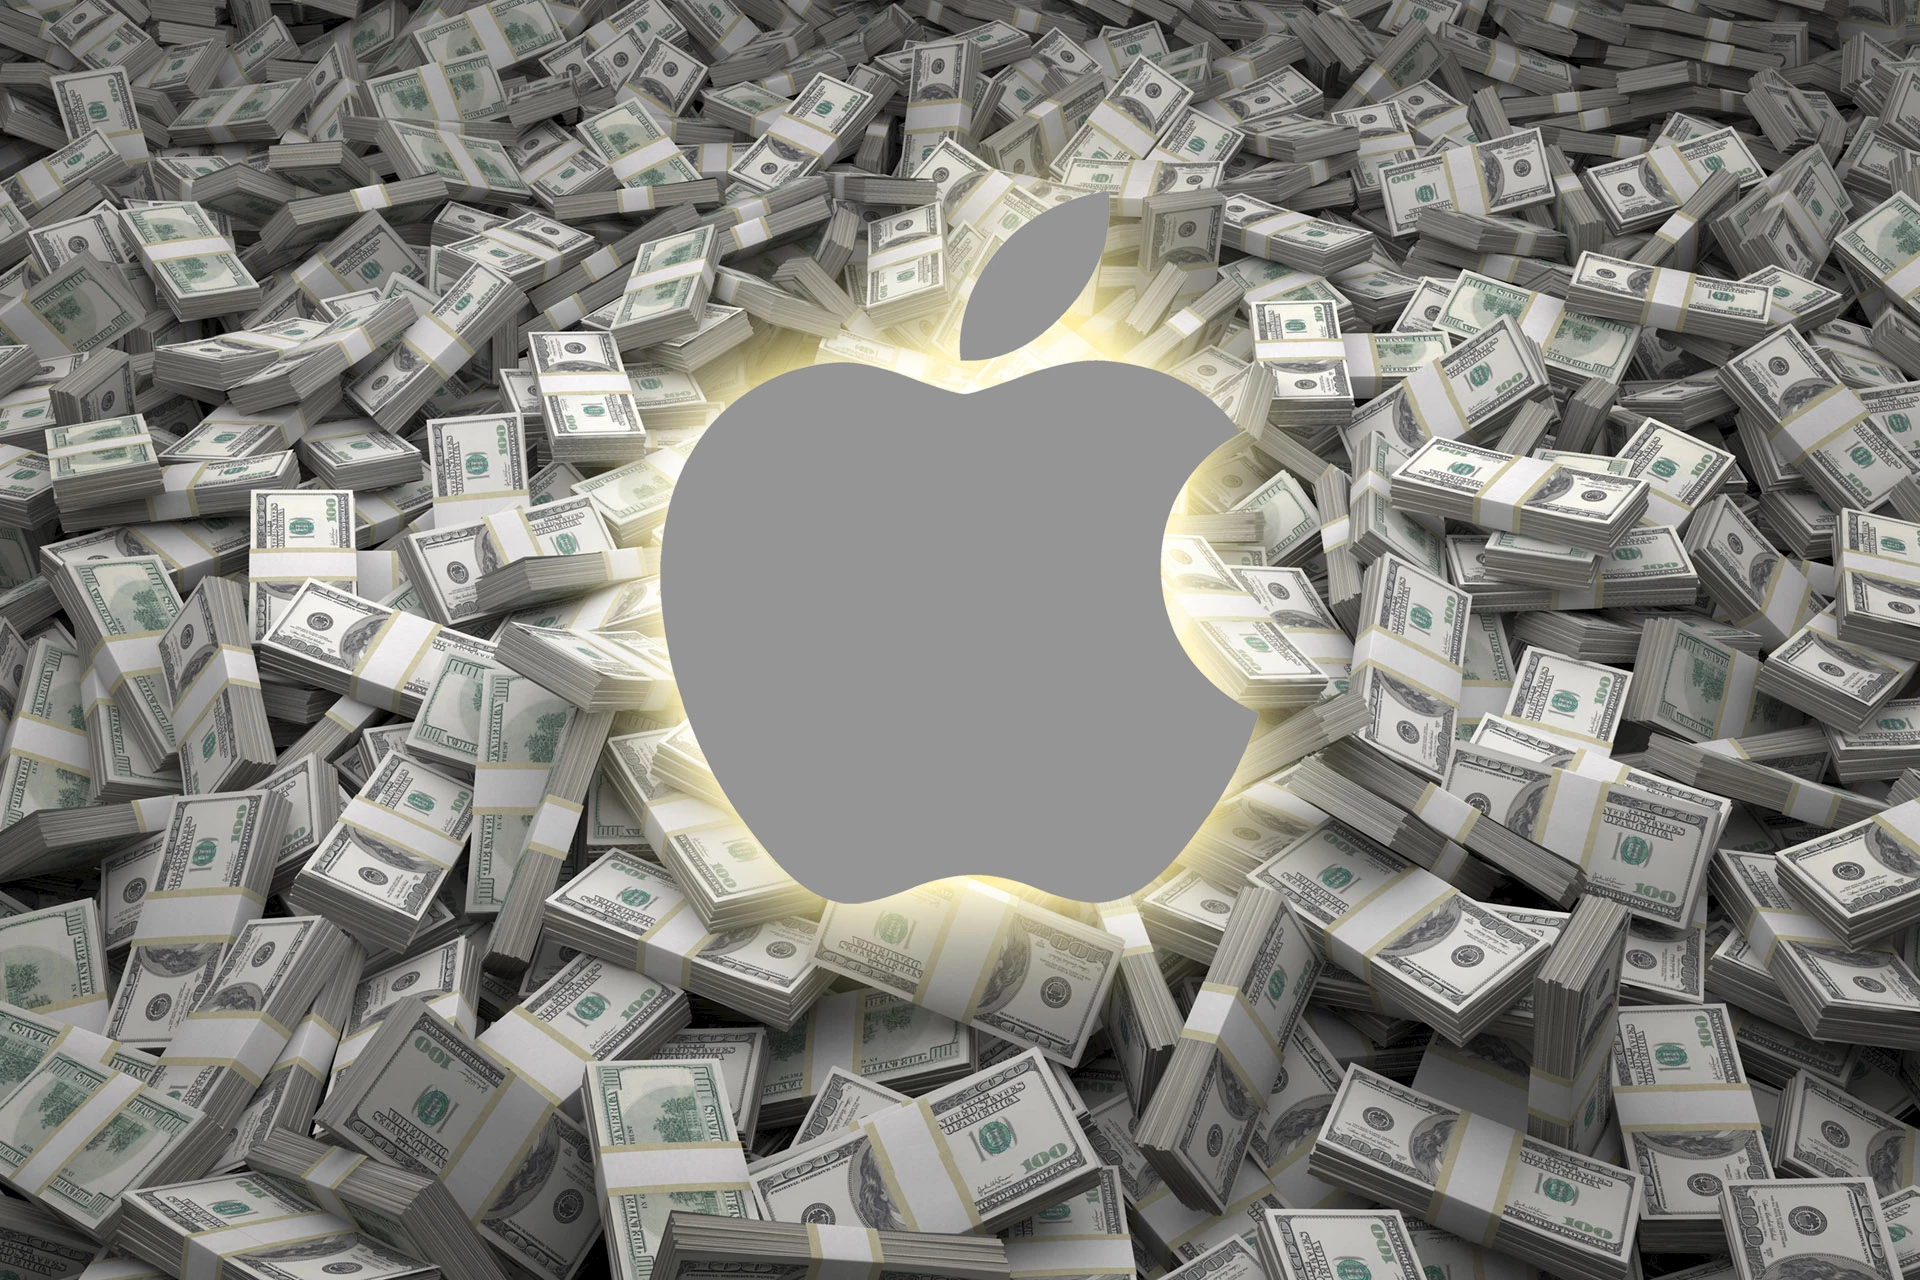 Apple made more money than ever.